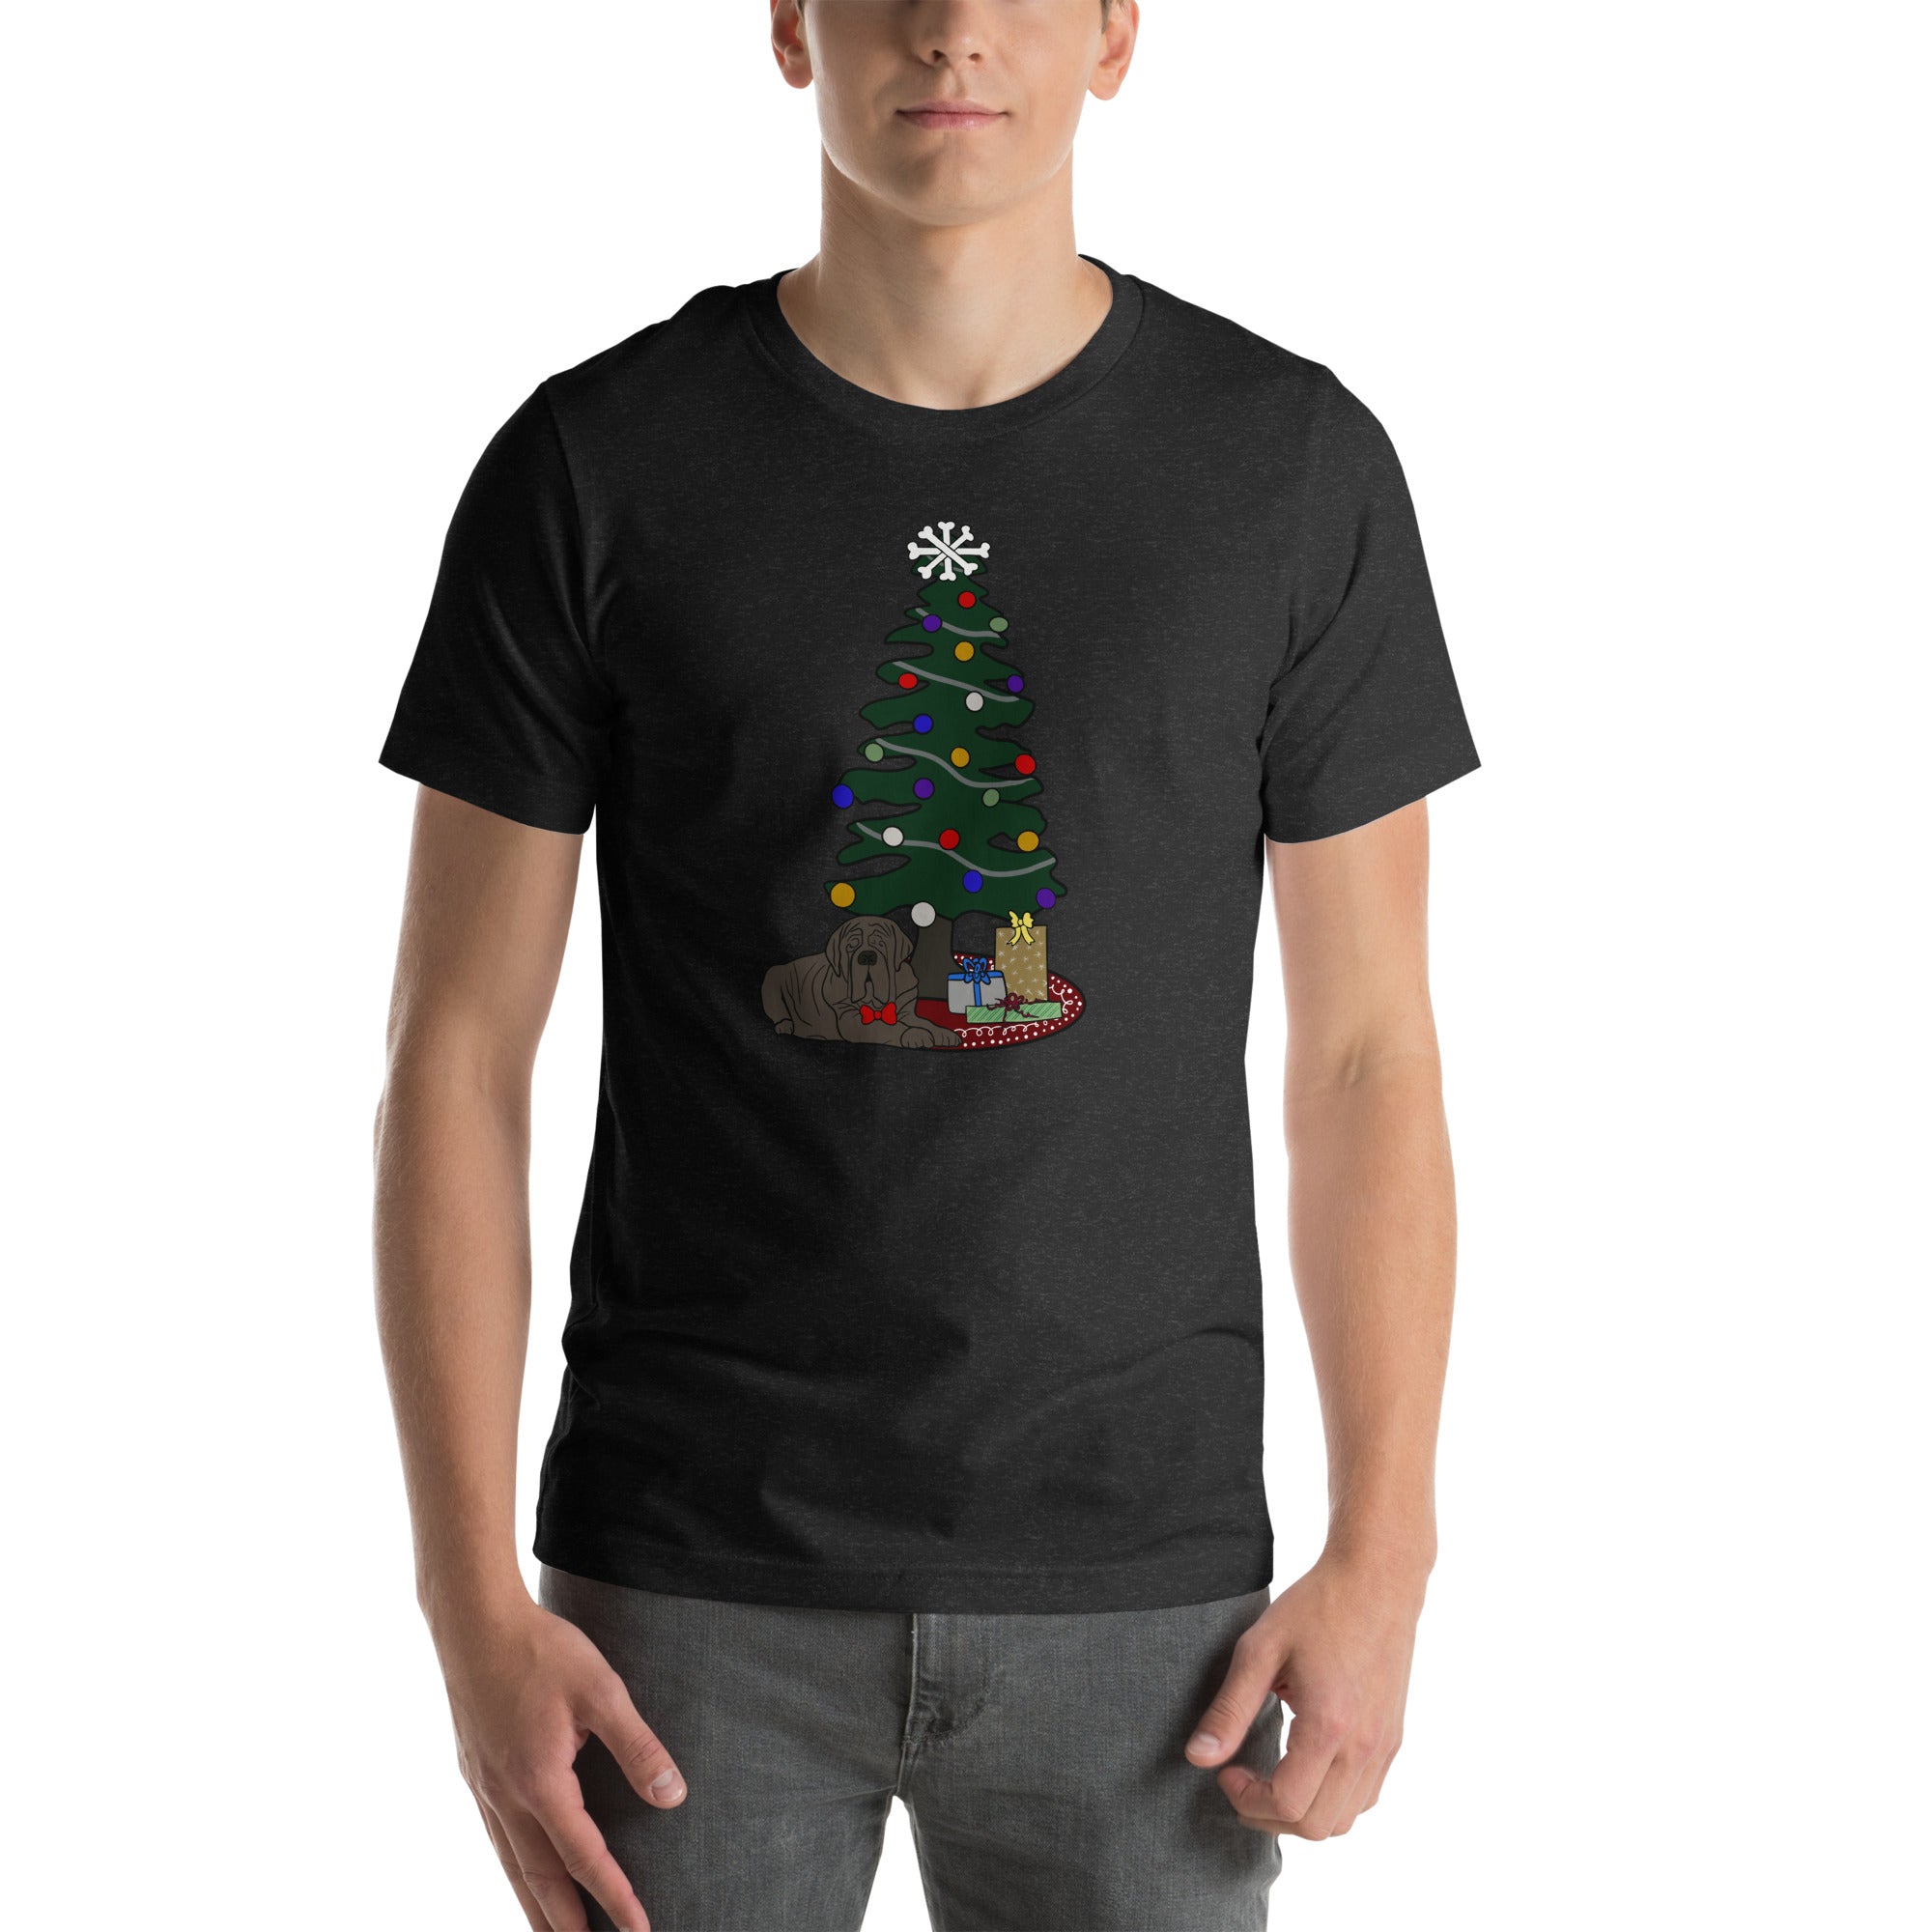 Chillin' Under the Christmas Tree T-Shirt - TAILWAGS UNLIMITED